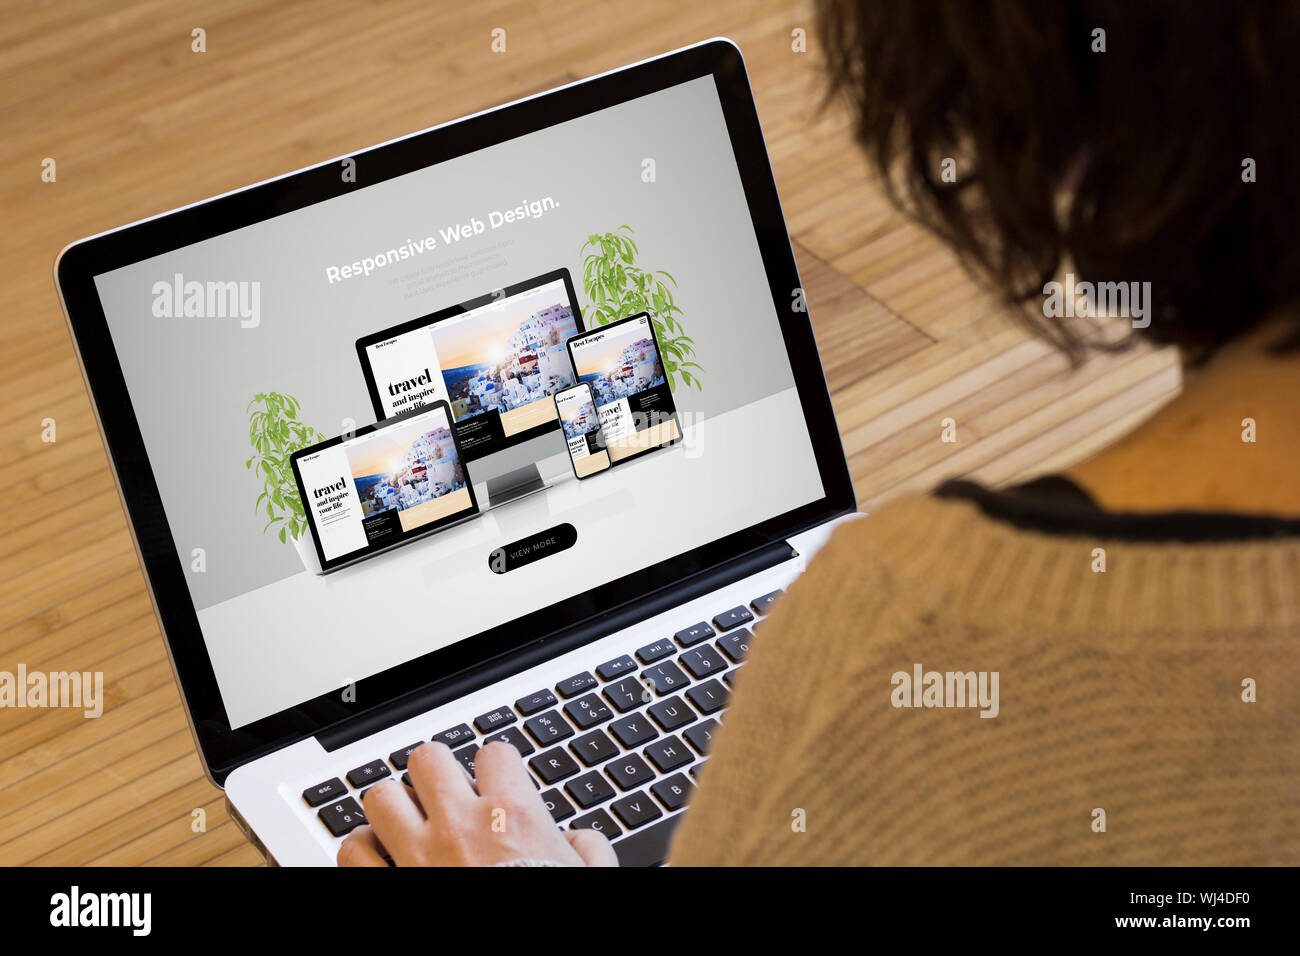 web design concept: responsive web design on a laptop screen. Screen graphics are made up. Stock Photo